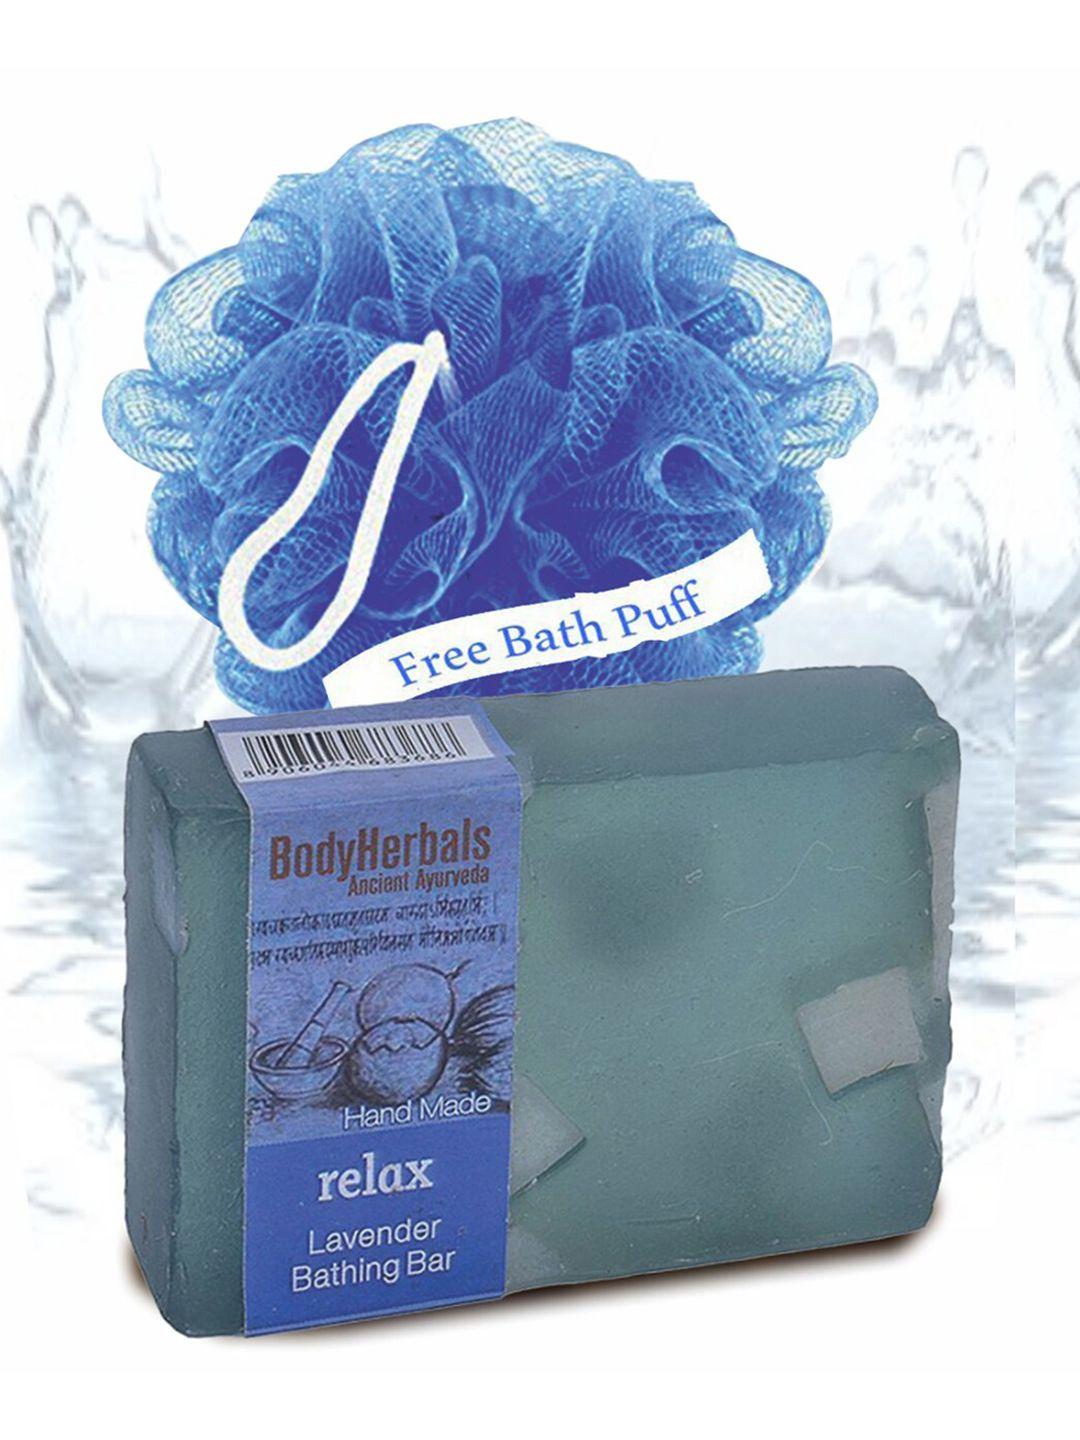 bodyherbals relax lavender bathing bar with loofah -100 g